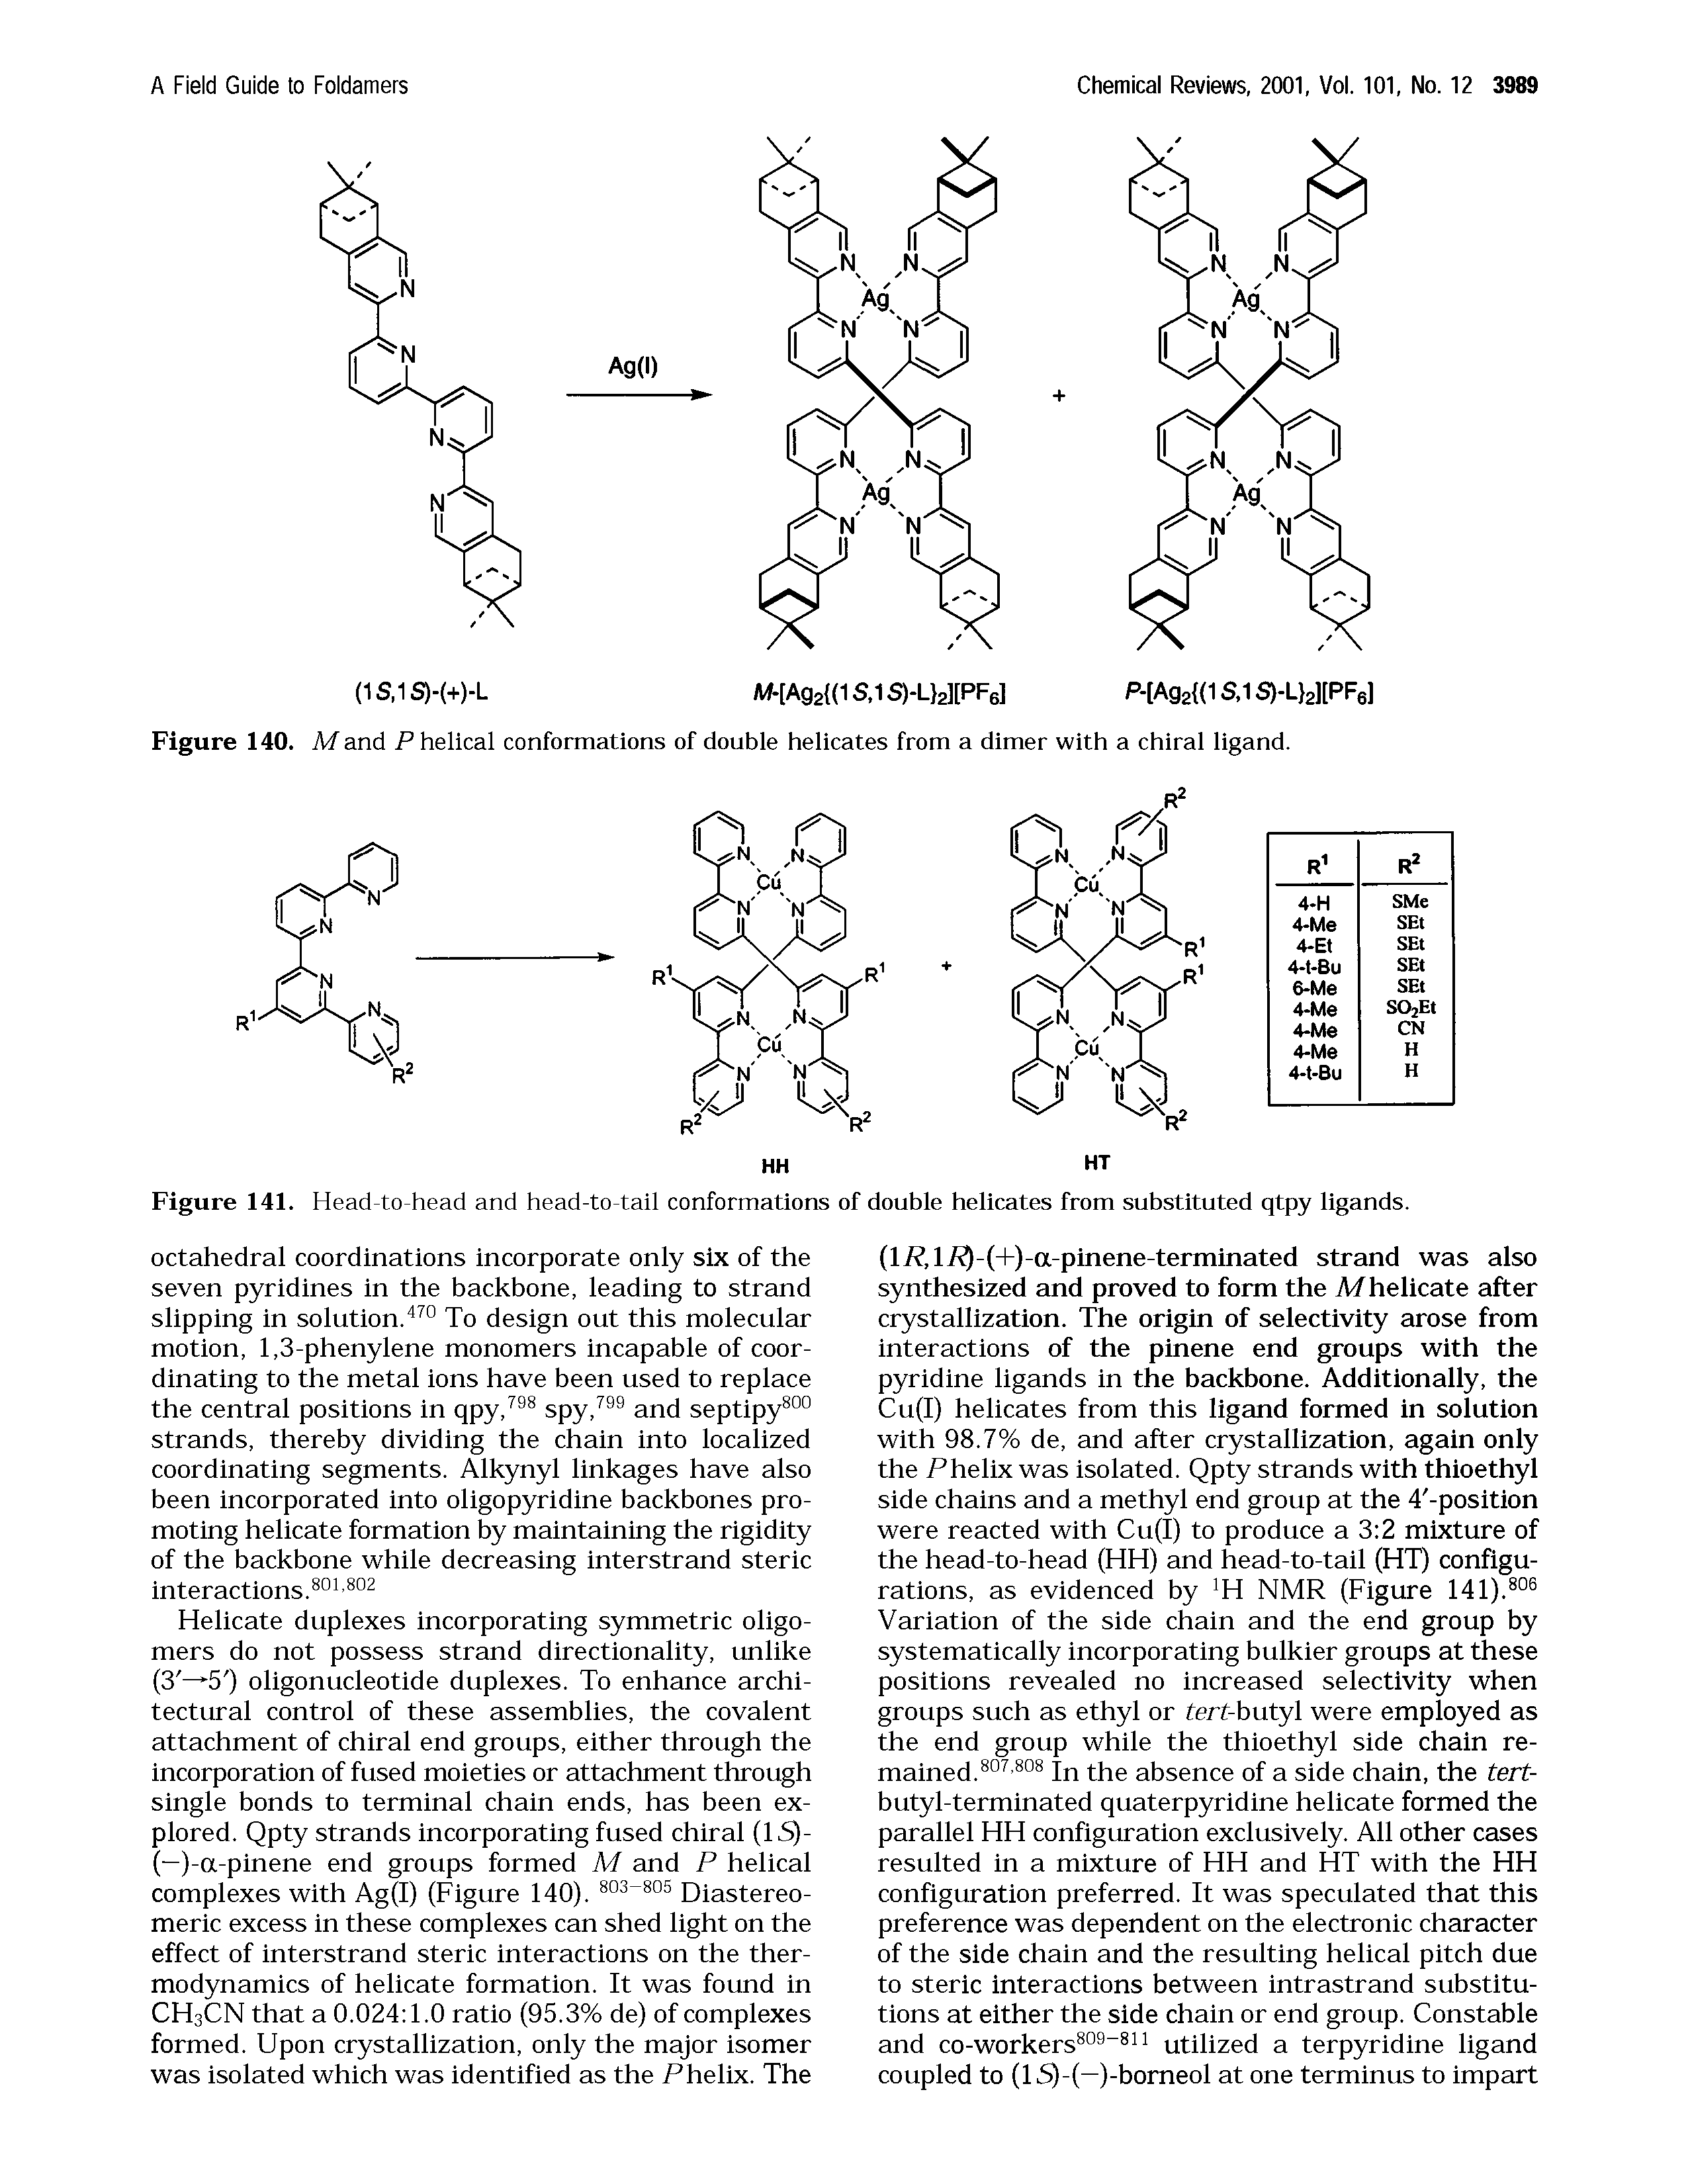 Figure 140. Mand P helical conformations of double helicates from a dimer with a chiral ligand.